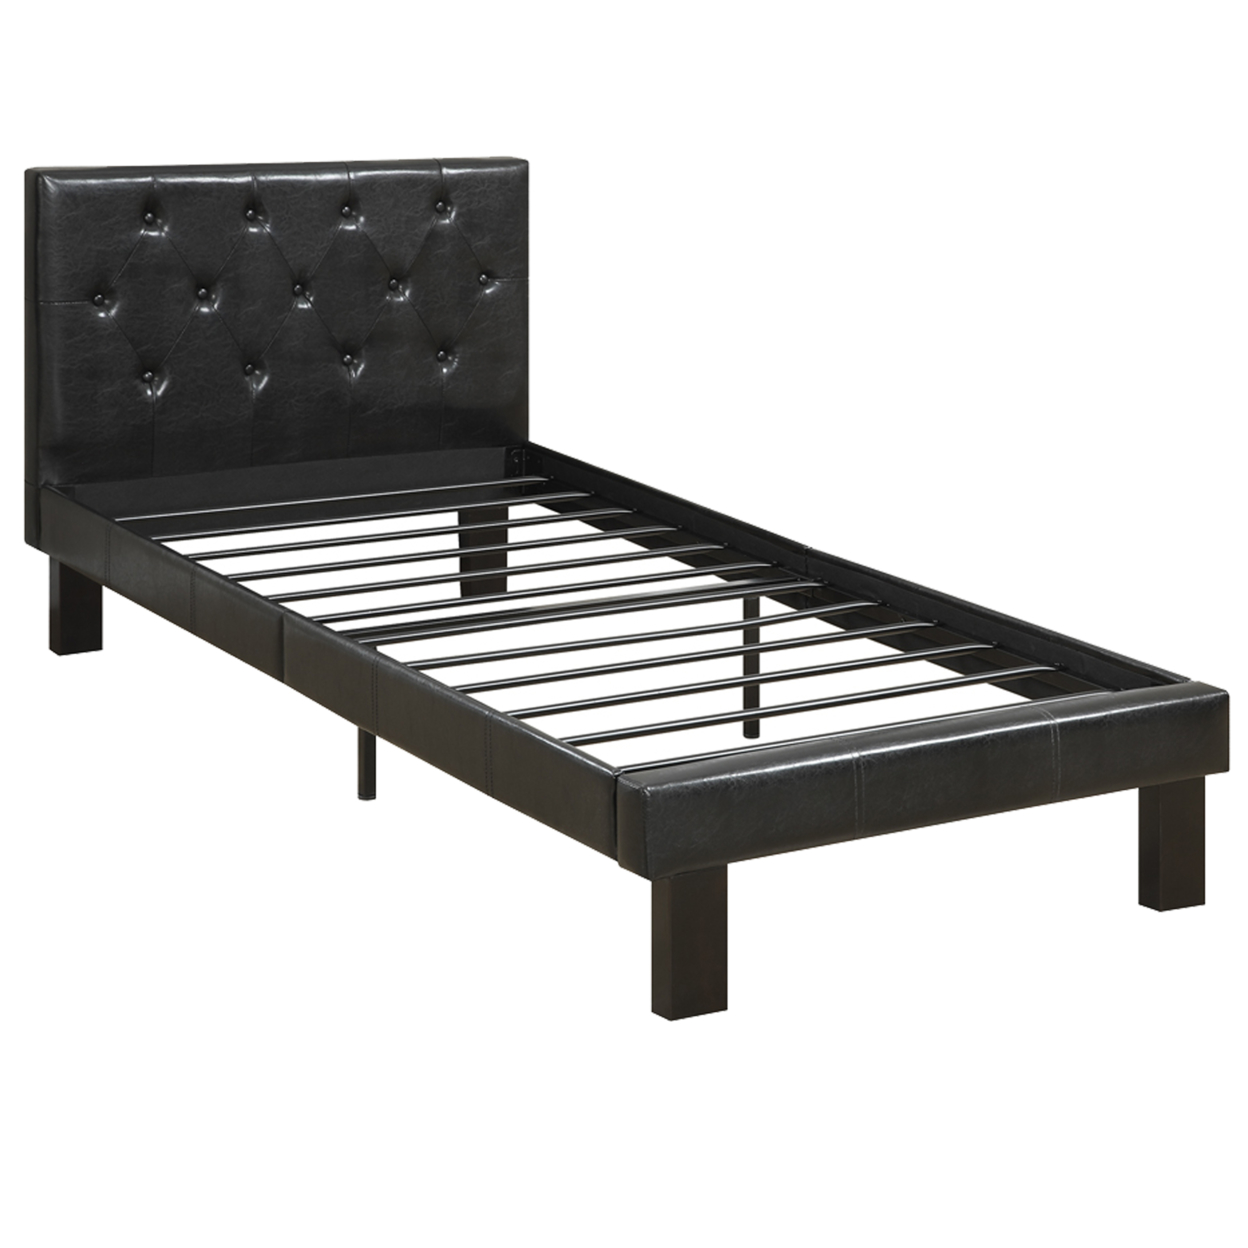 Faux Leather Upholstered Full Size Bed With Tufted Headboard Black- Saltoro Sherpi